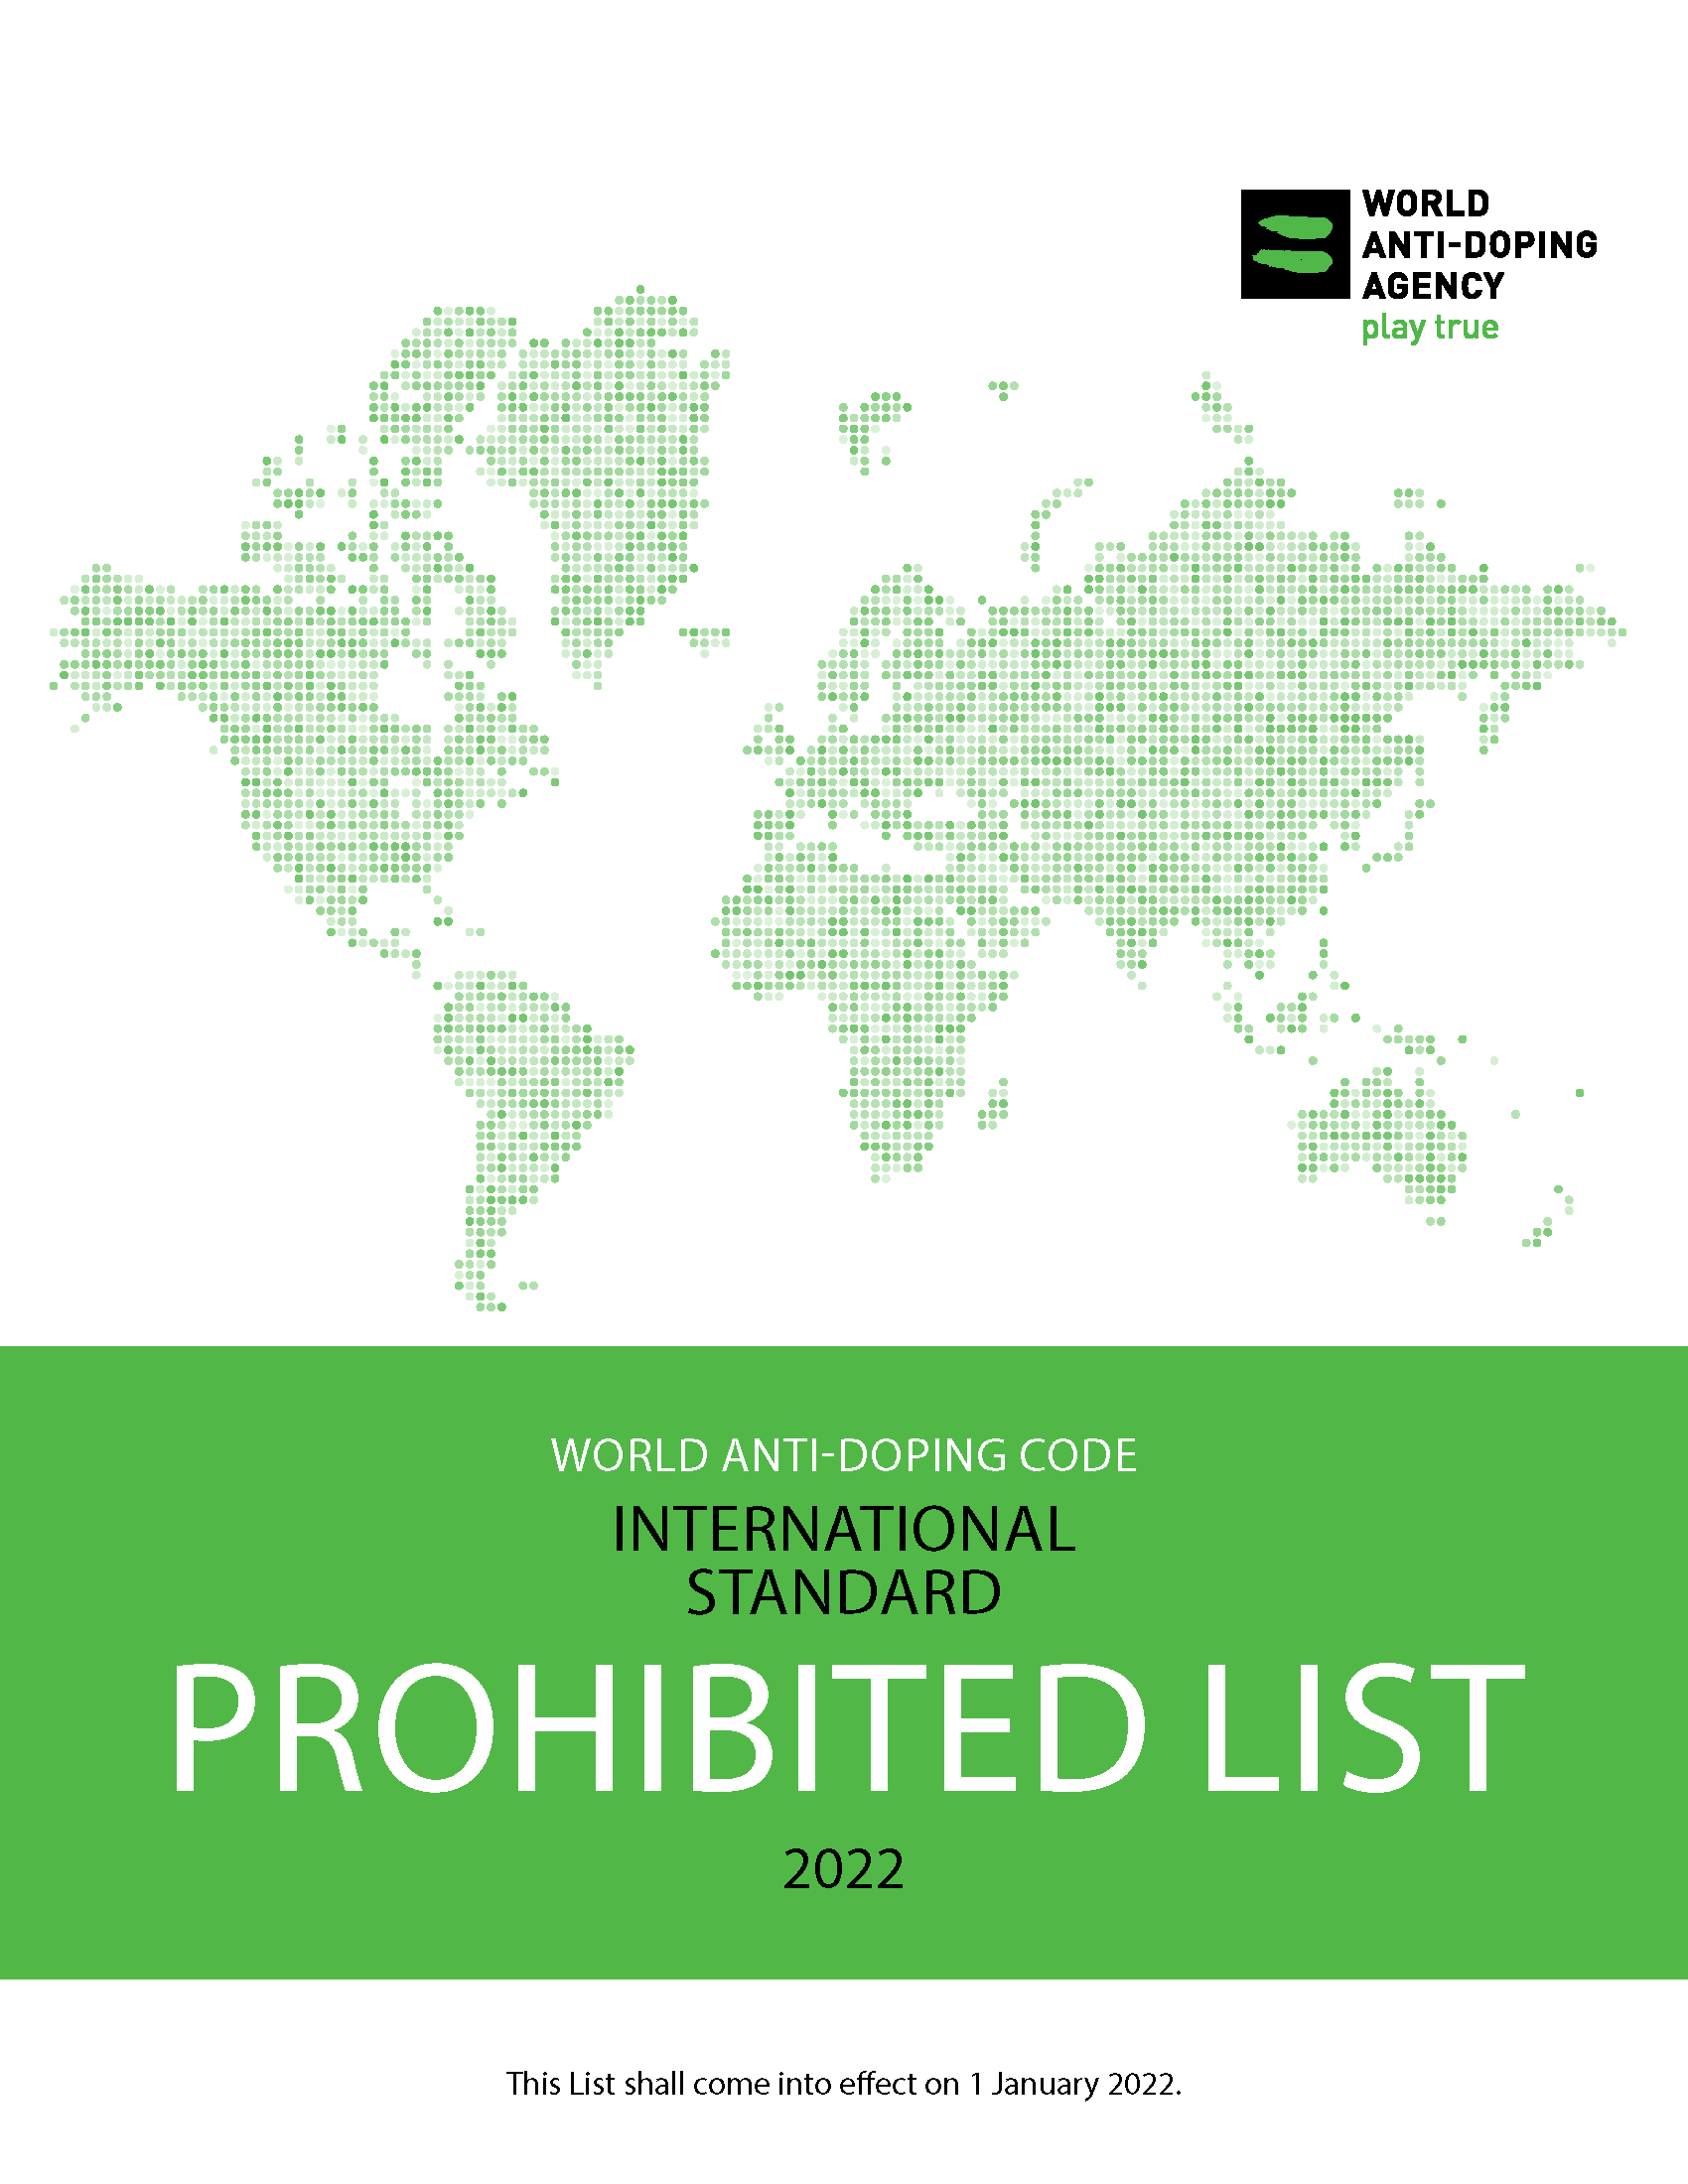  List of Prohibited Substances and Methods